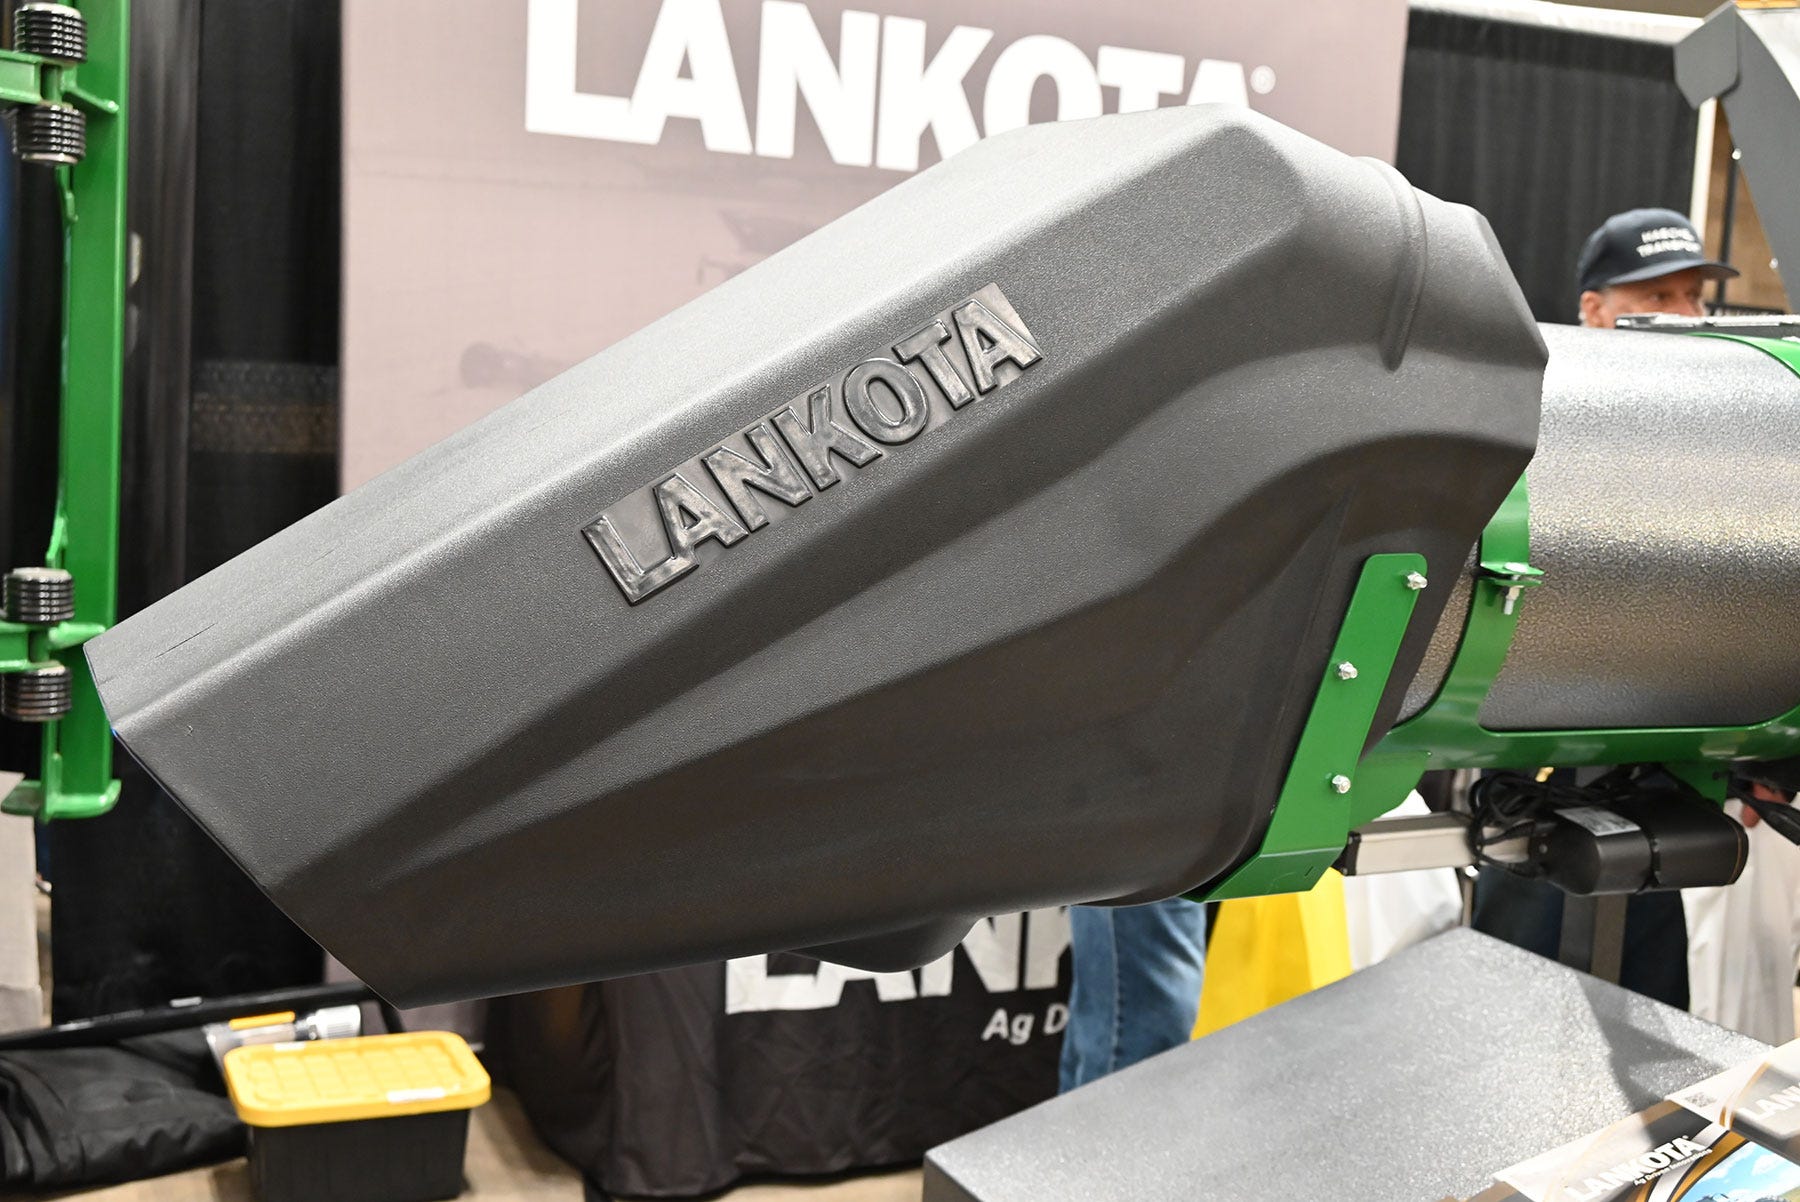 A close up of Lankota’s tippy spout for combine tractors